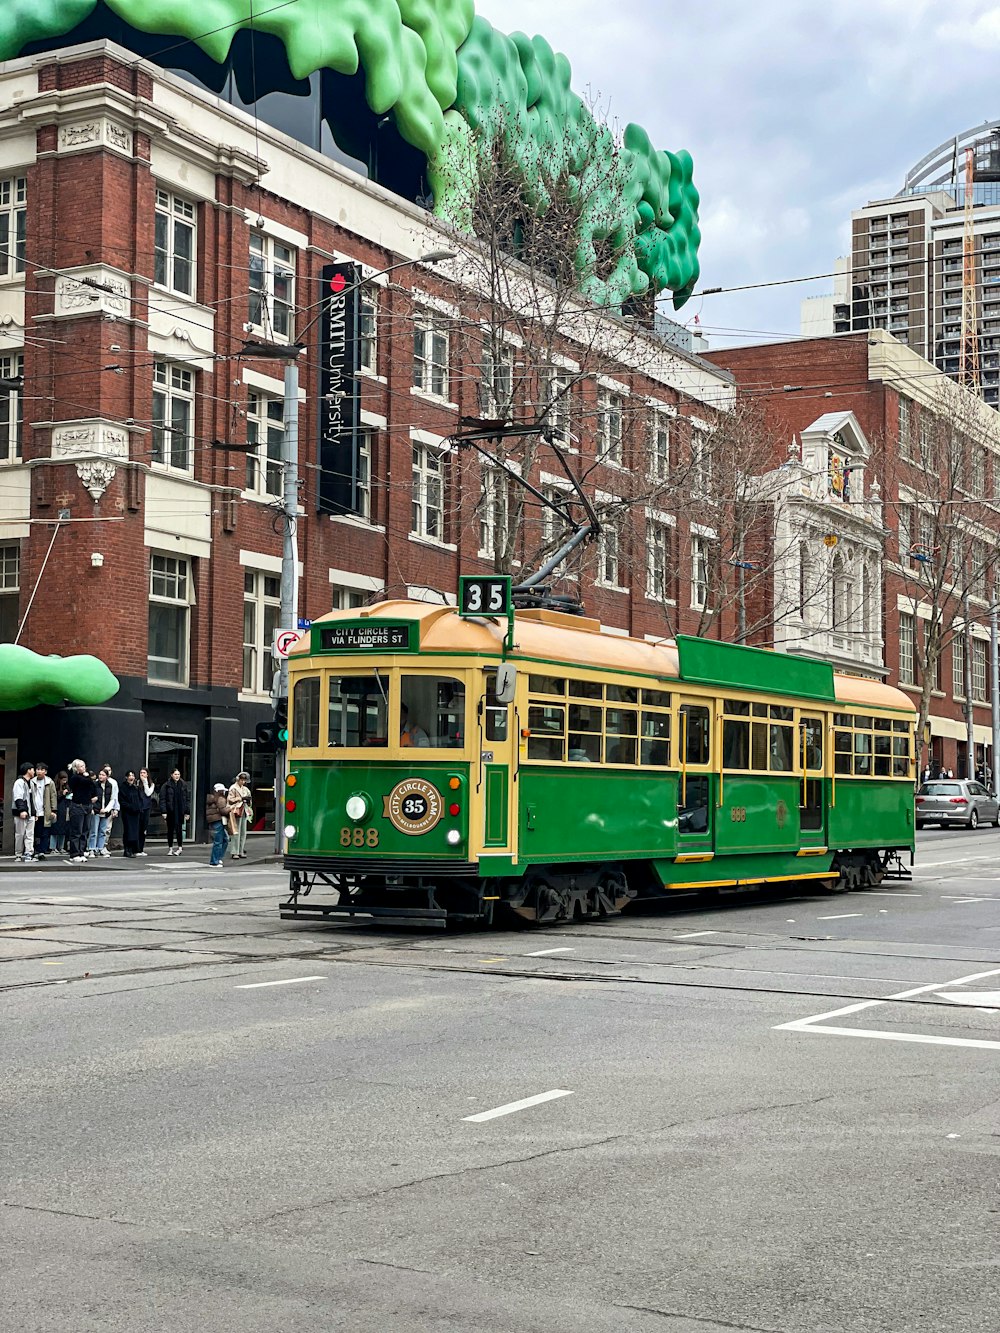 a green and yellow trolley on a city street